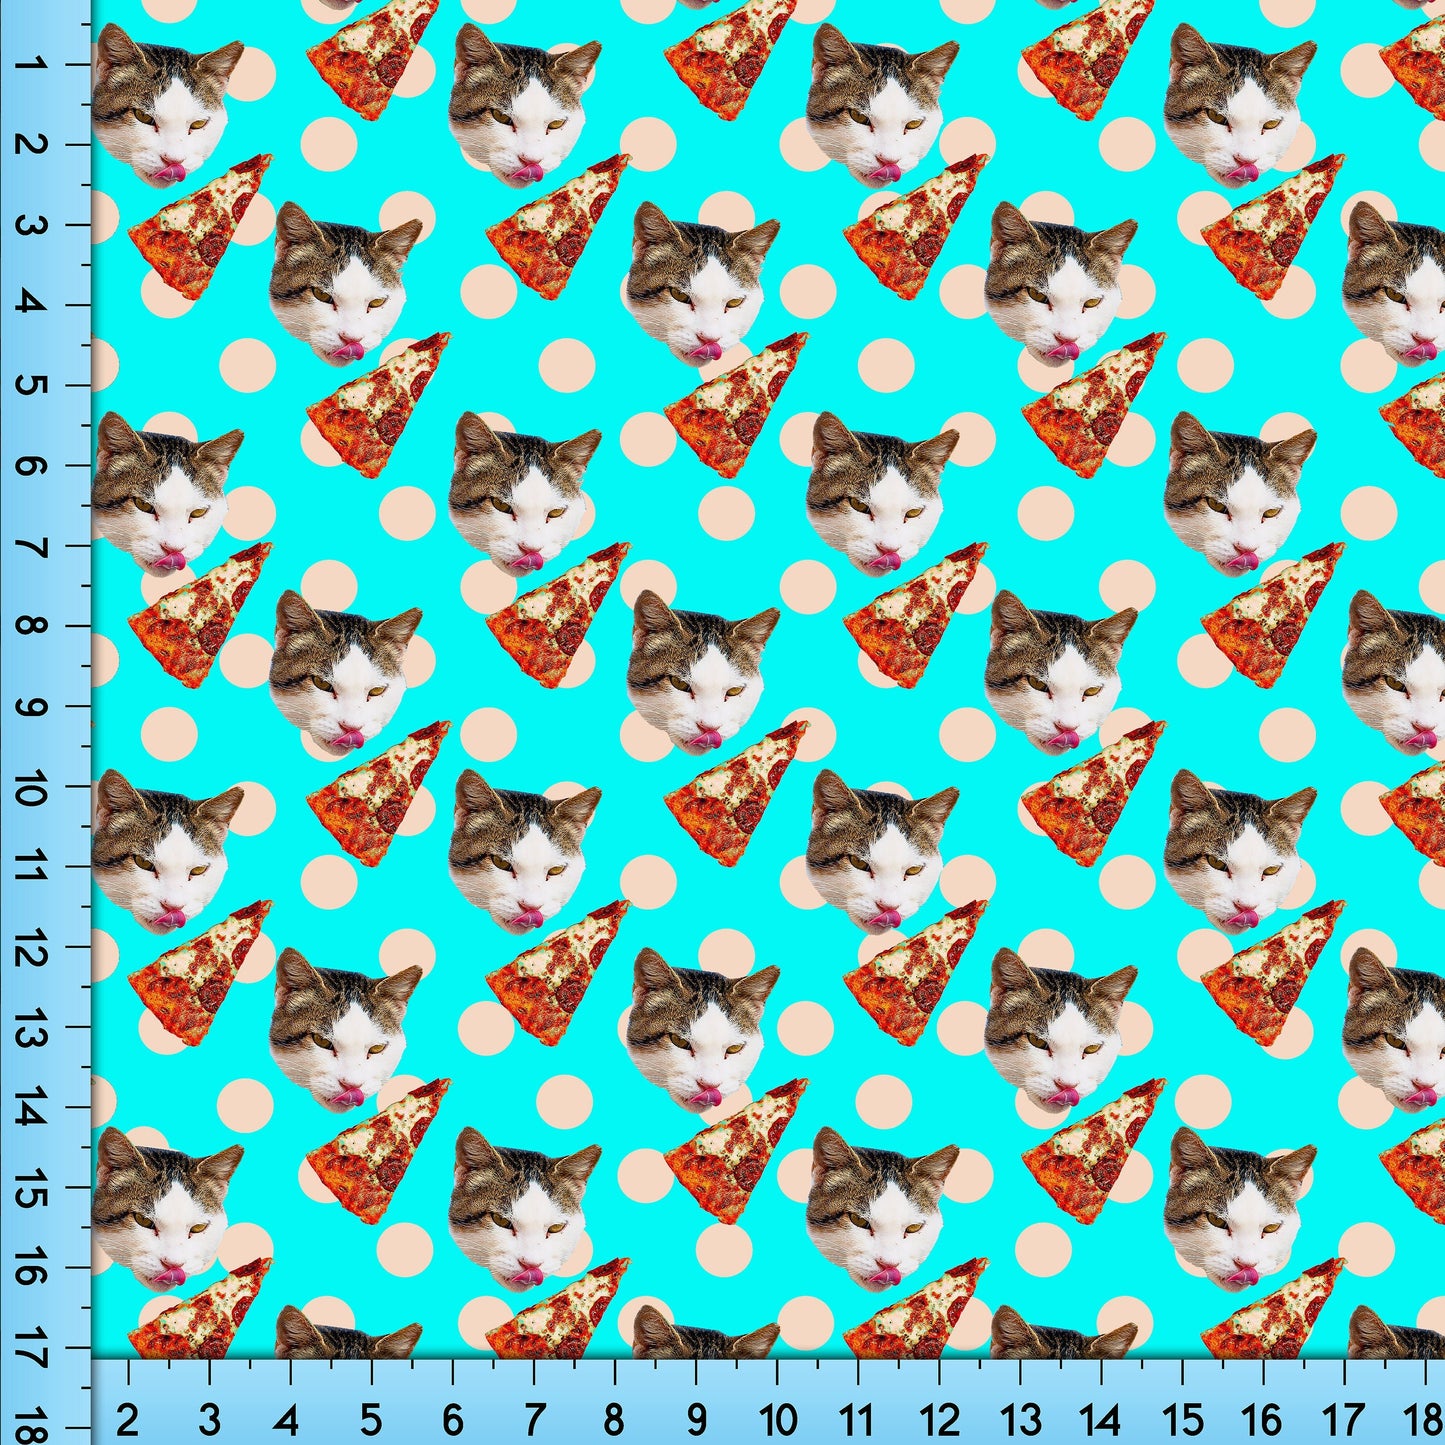 Turquoise Pizza Cat Fabric Design Printed By the Yard. Funny Blue Novelty Cat with Pizza design for shirts, masks, crafts